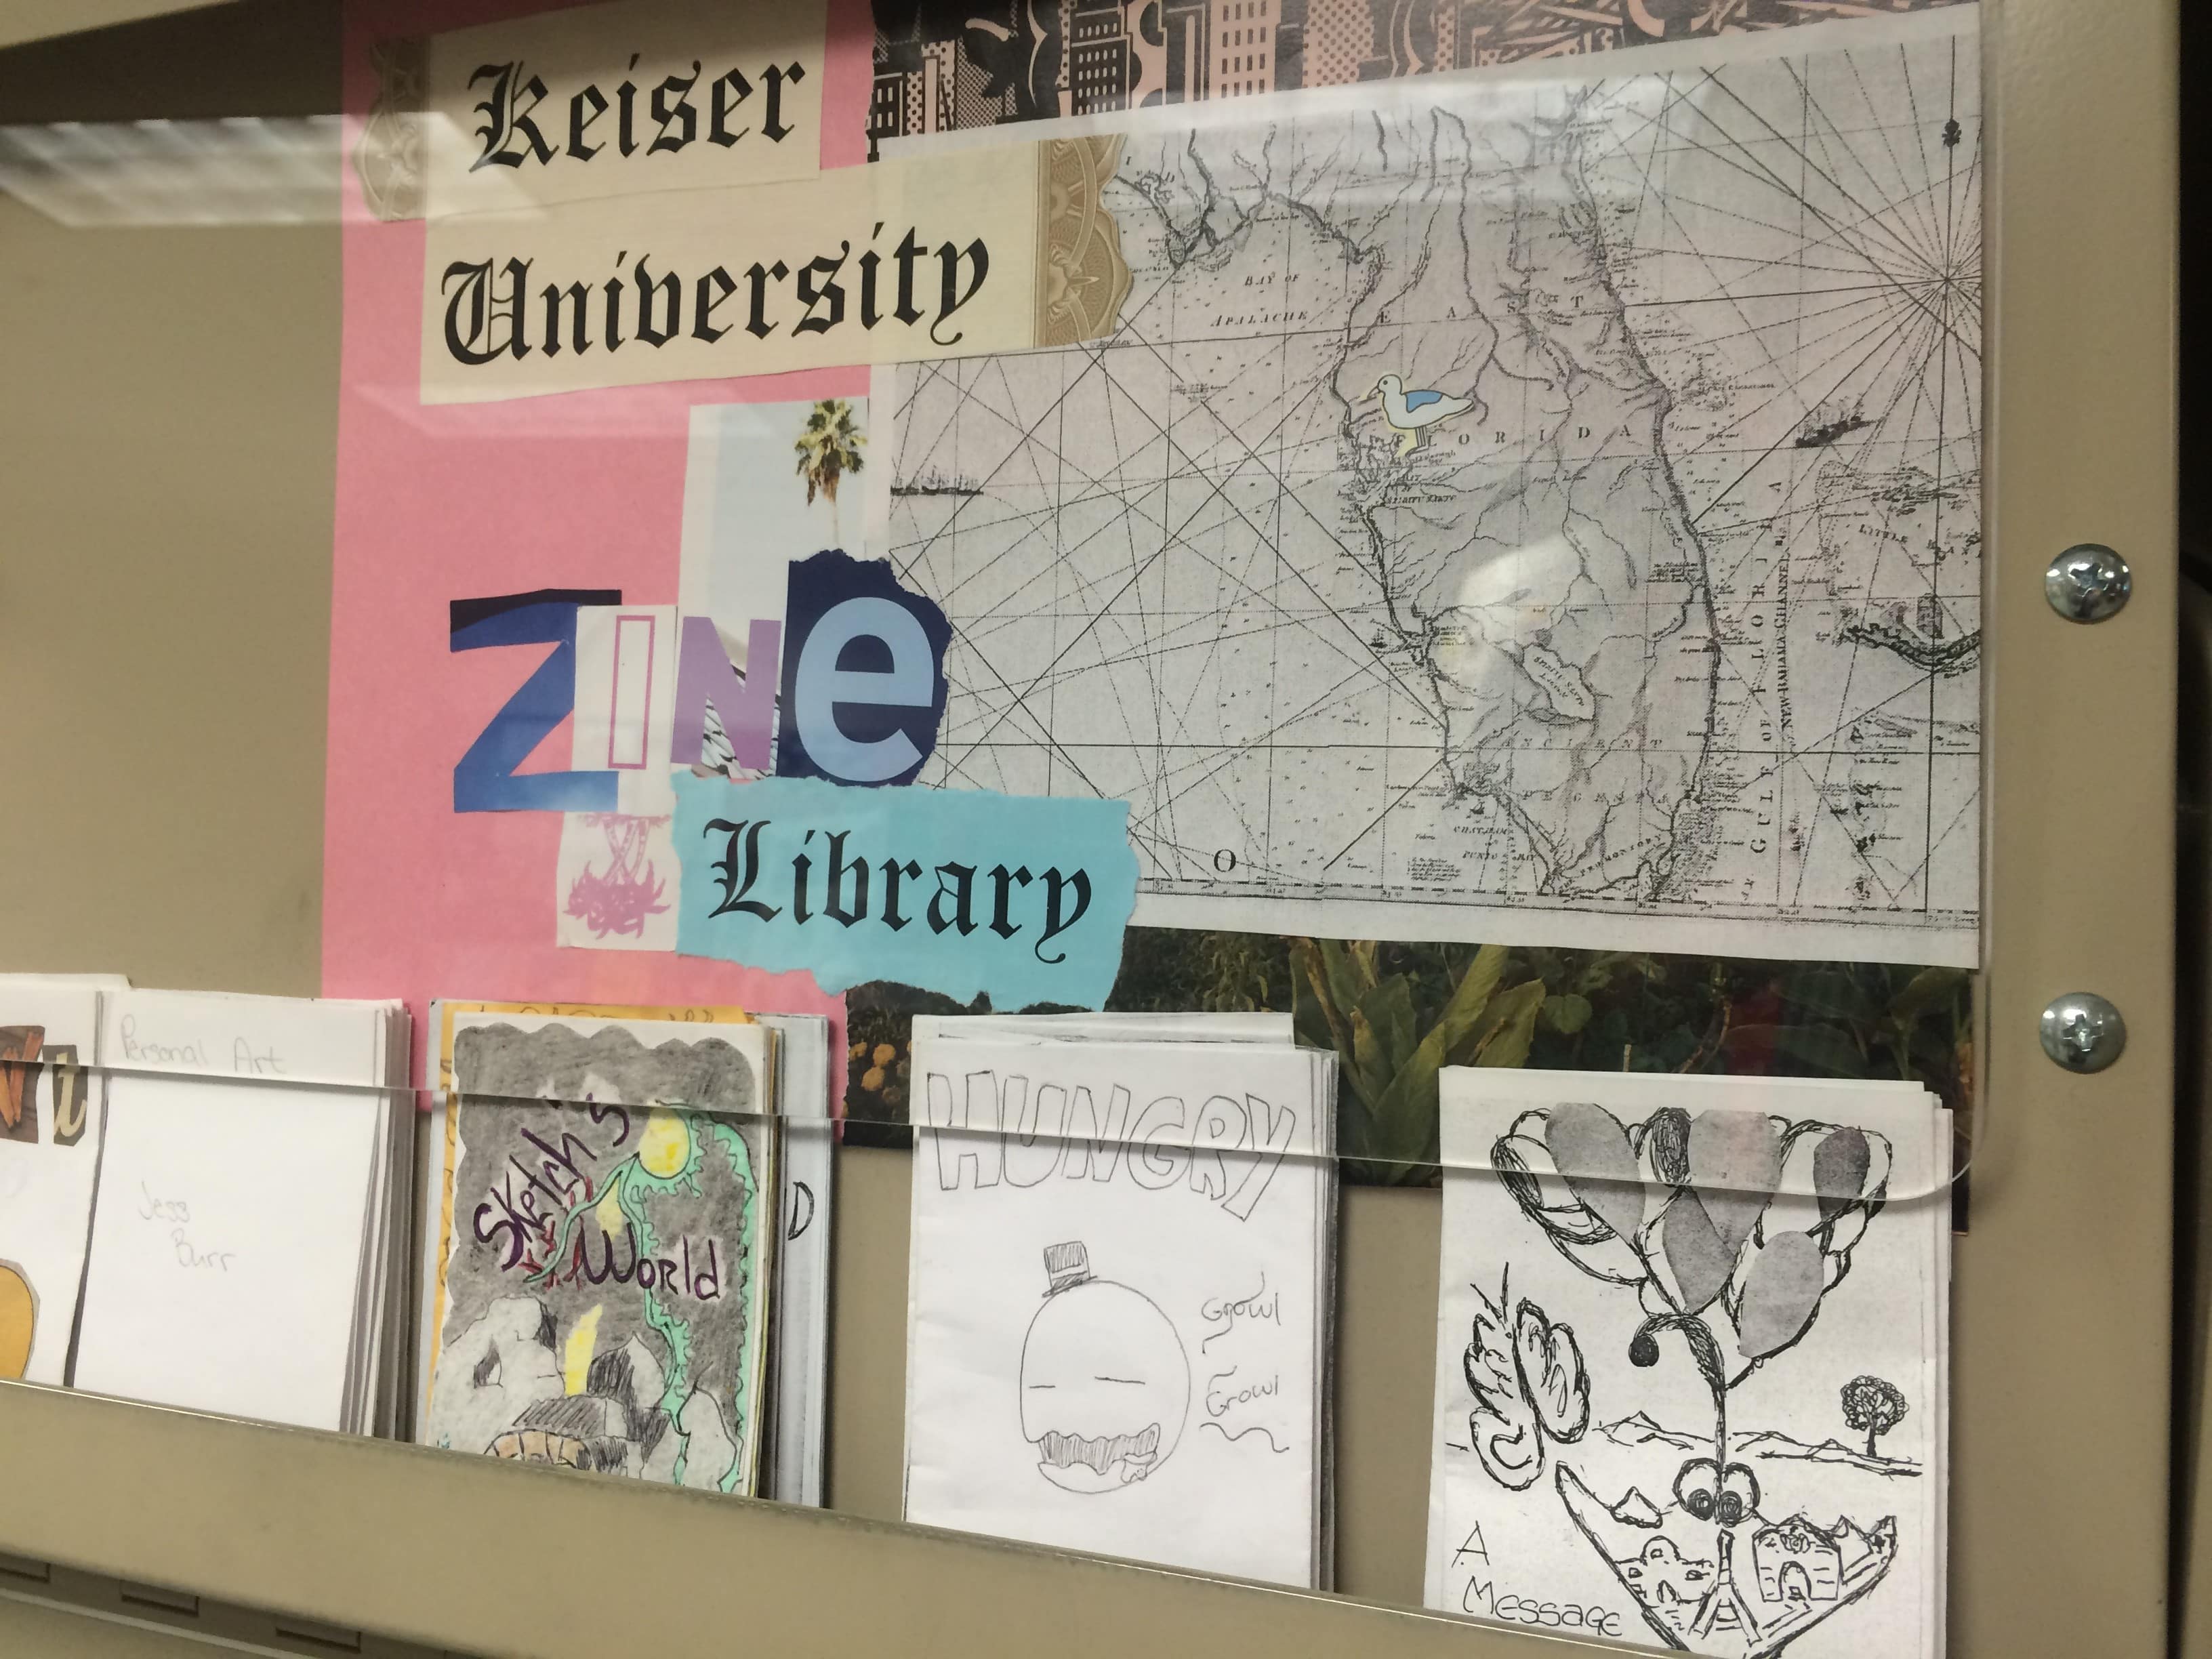 Tampa Establishes a Library Section Dedicated to Creative Work by Students